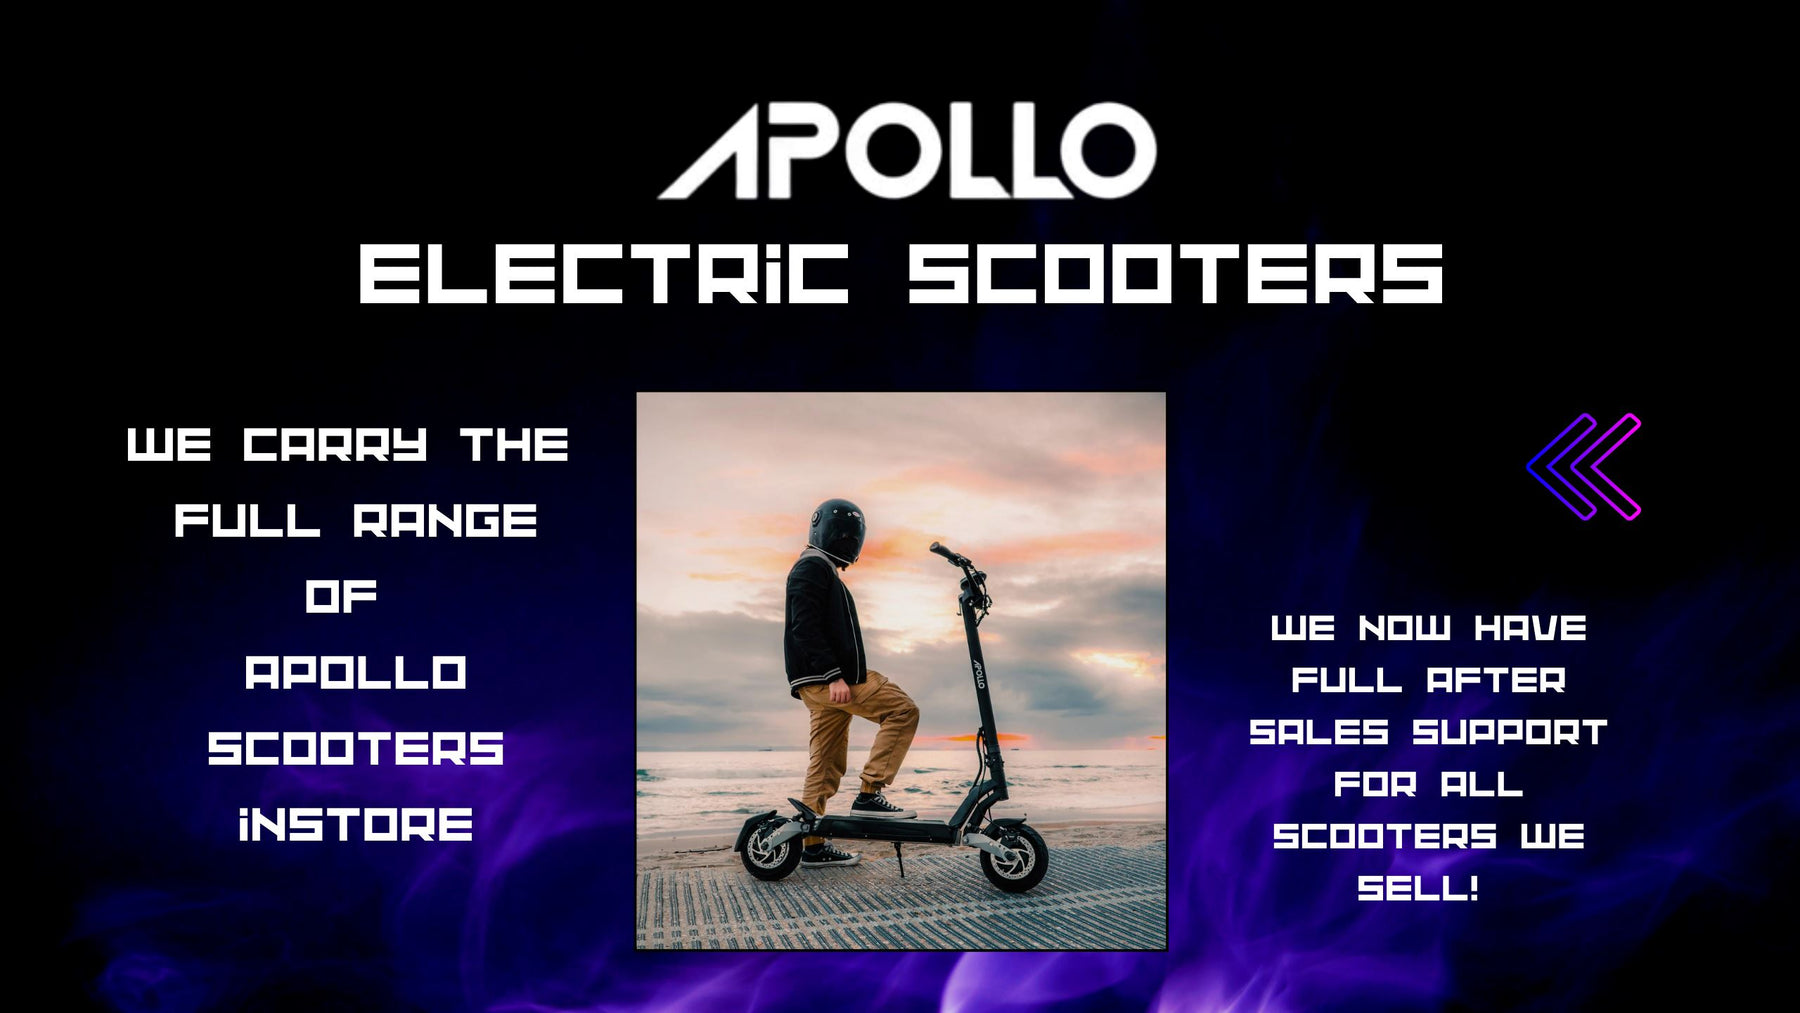 We now carry the highly sought after Apollo Electric Scooter range!